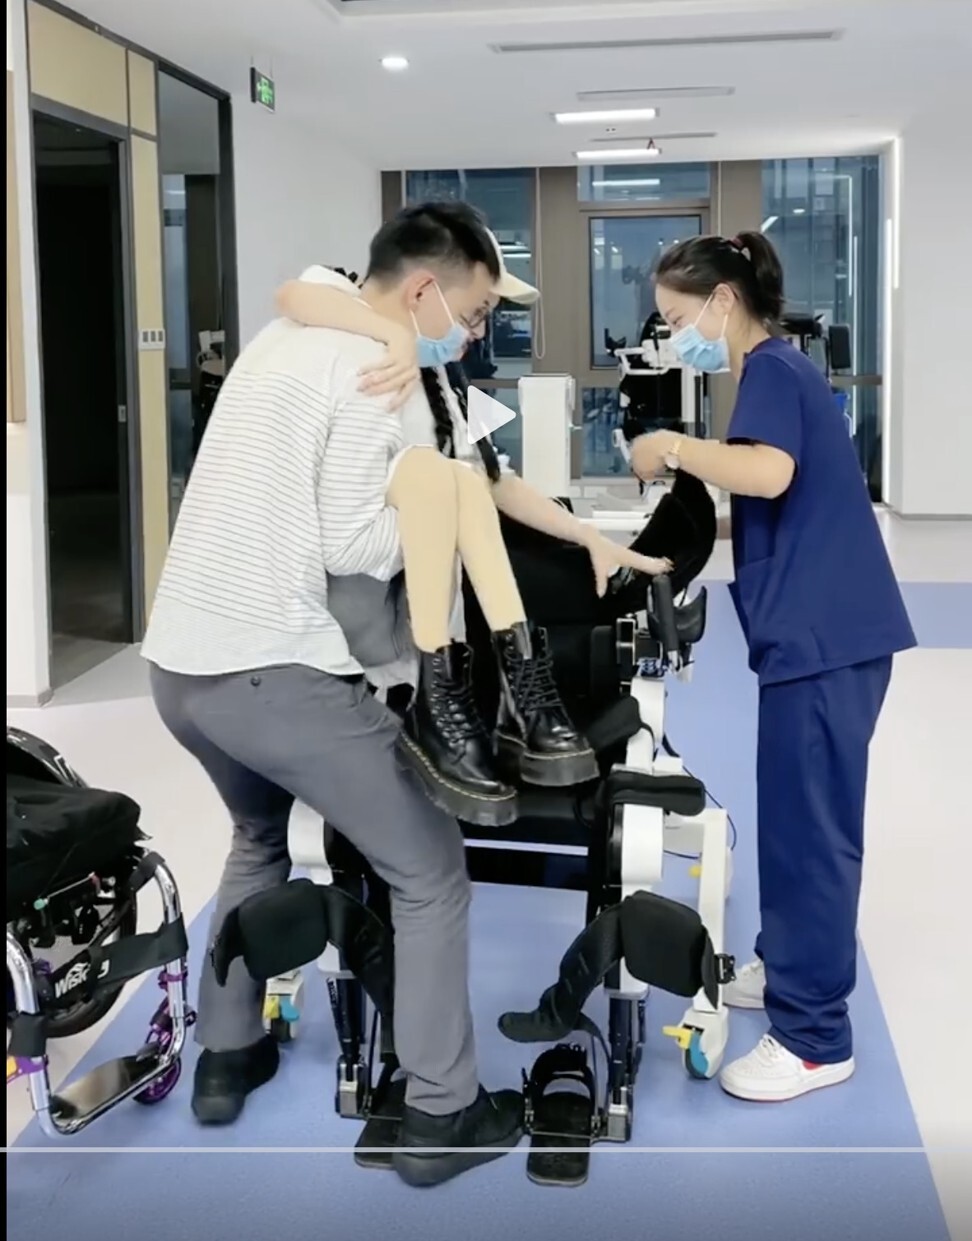 Medical workers help Duoduo get into the RoboCT exoskeleton equipment. Photo: Weibo